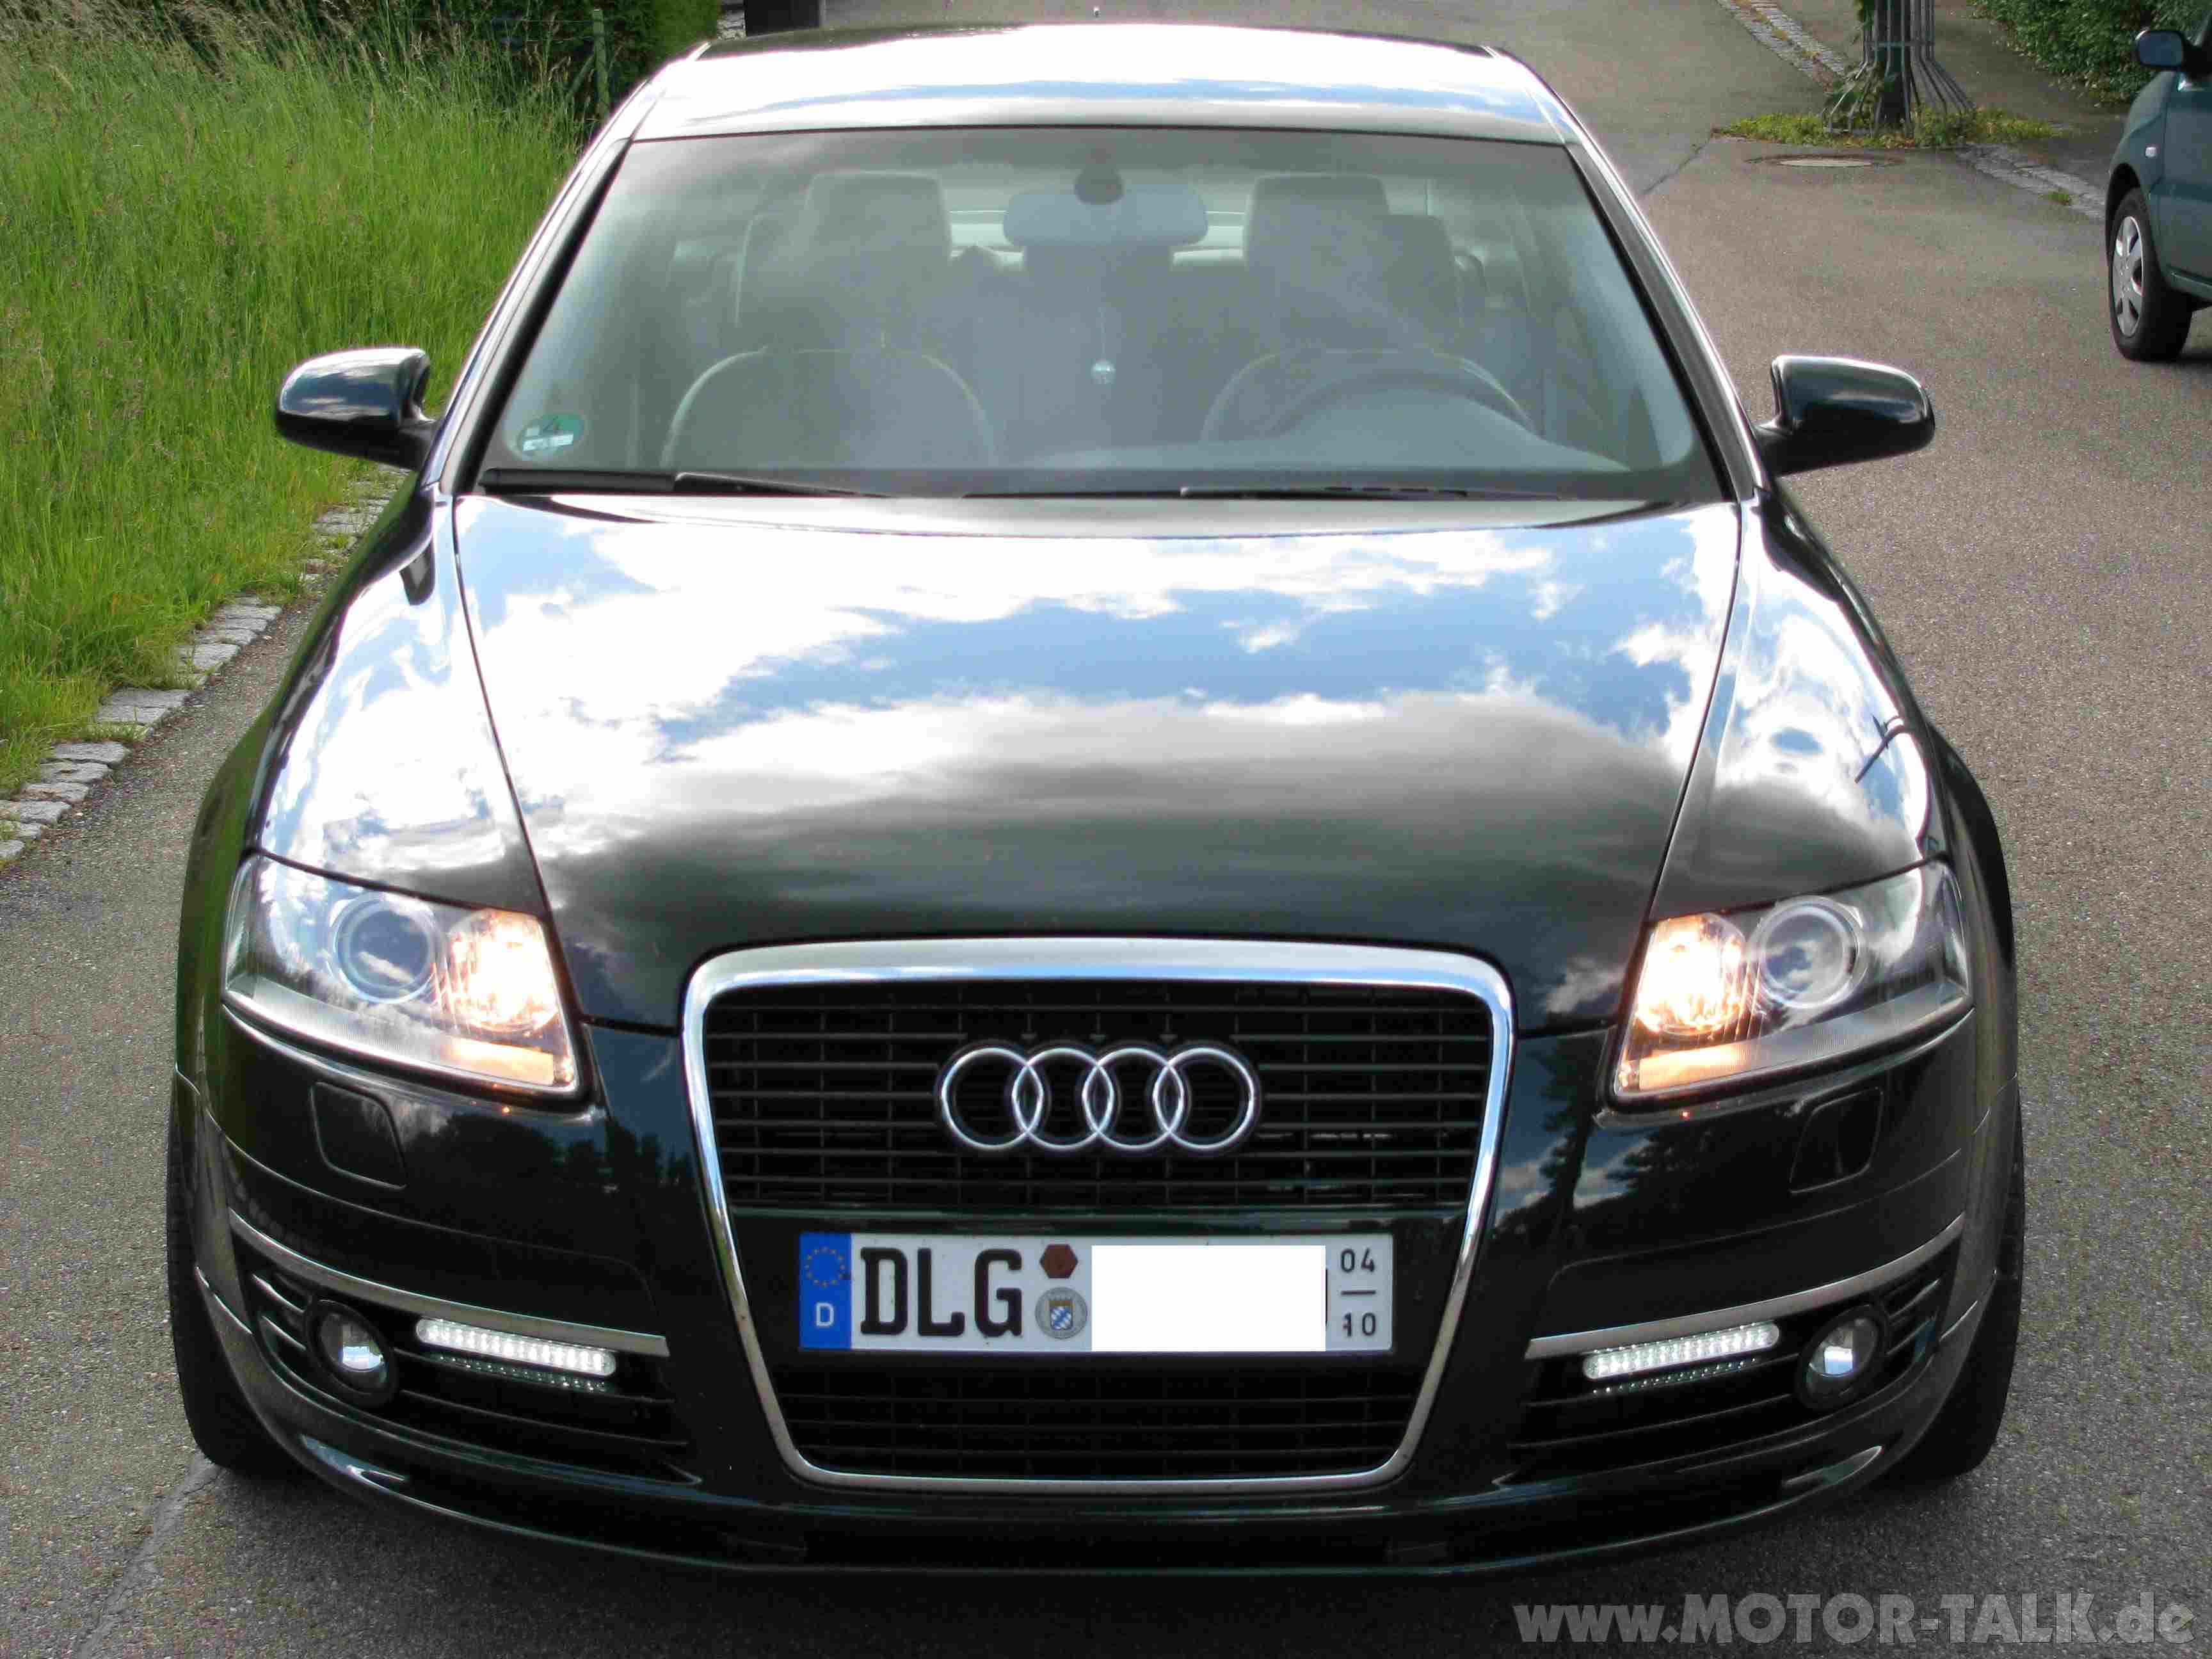 File:Audi A6 C6 front 20090329.jpg - Wikimedia Commons